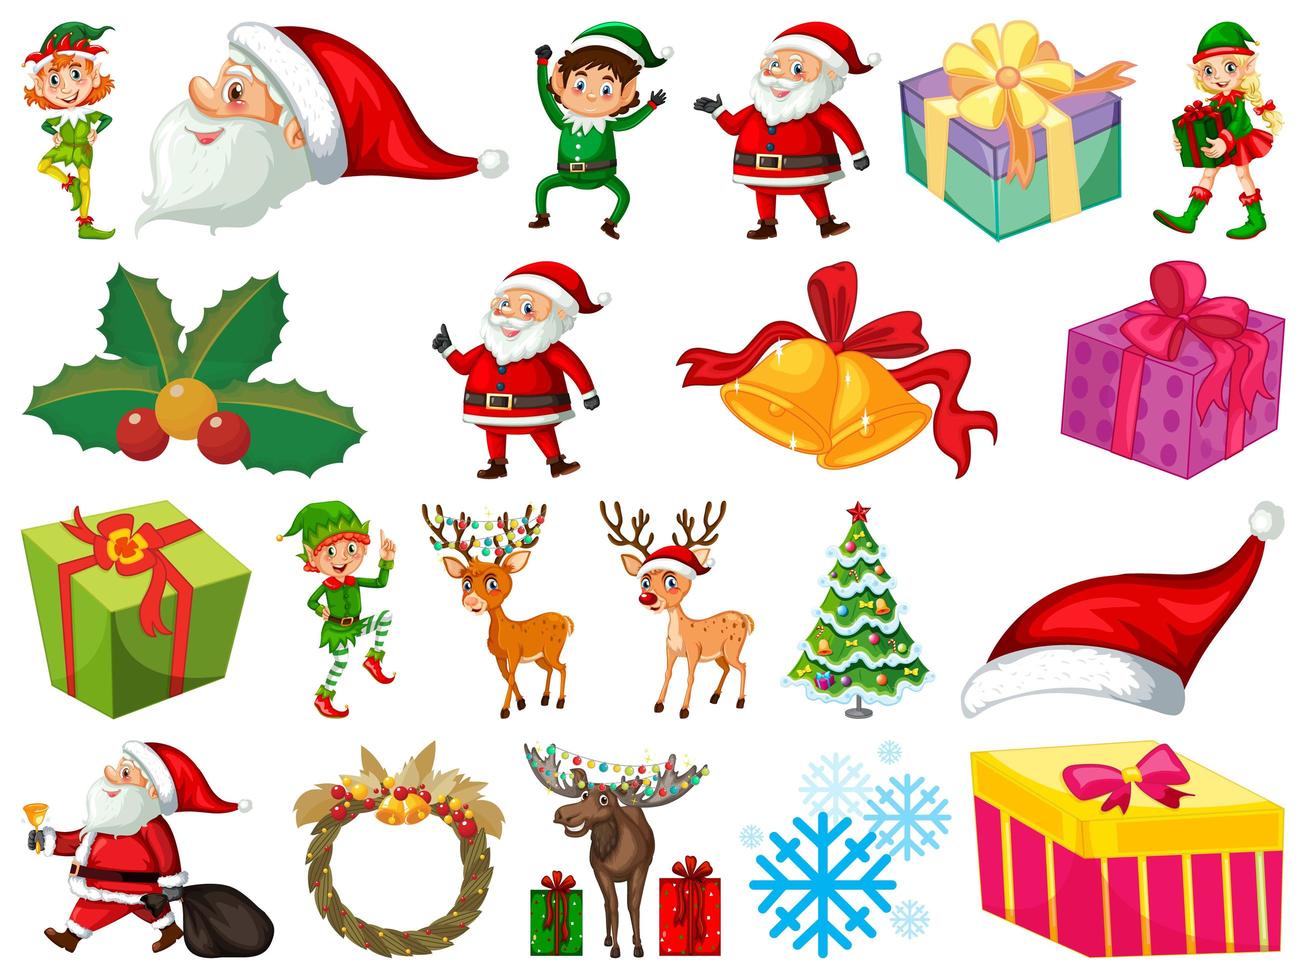 Set of Santa Claus cartoon character and Christmas objects isolated on white background vector